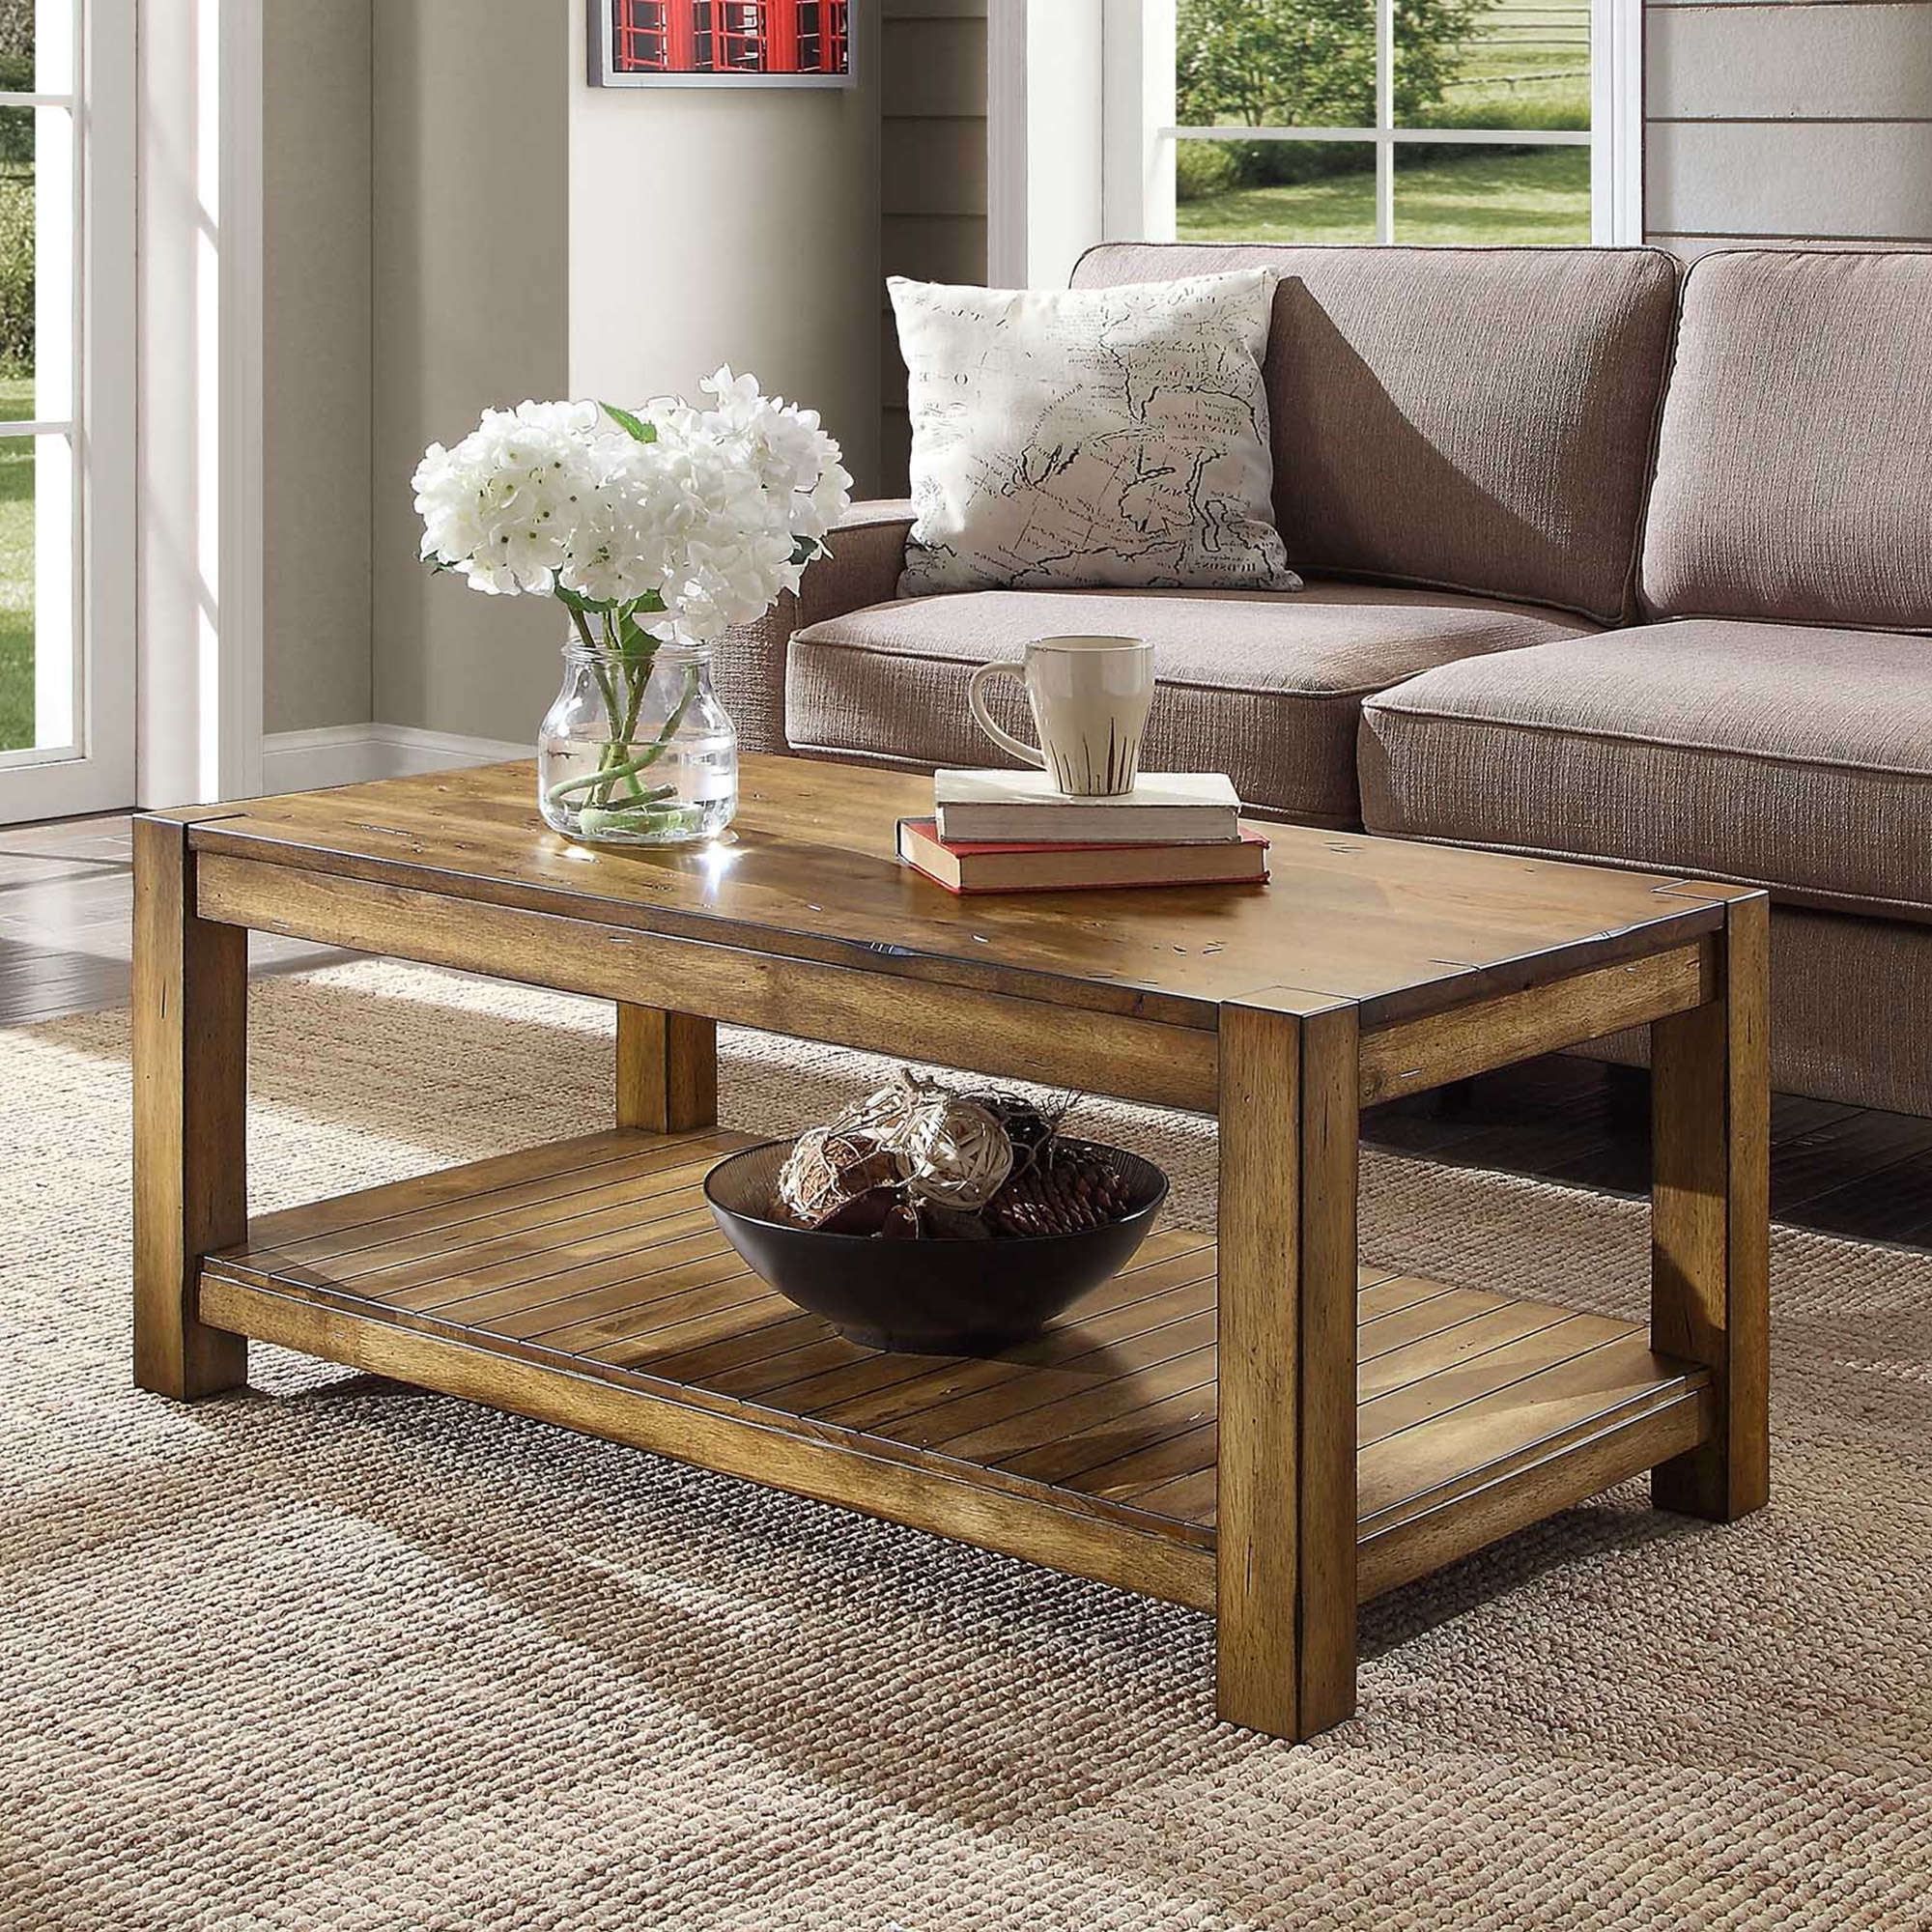 Bryant Solid Wood Coffee Table, Rustic Maple Brown Finish – Walmart Within Pemberly Row Replicated Wood Coffee Tables (View 16 of 20)